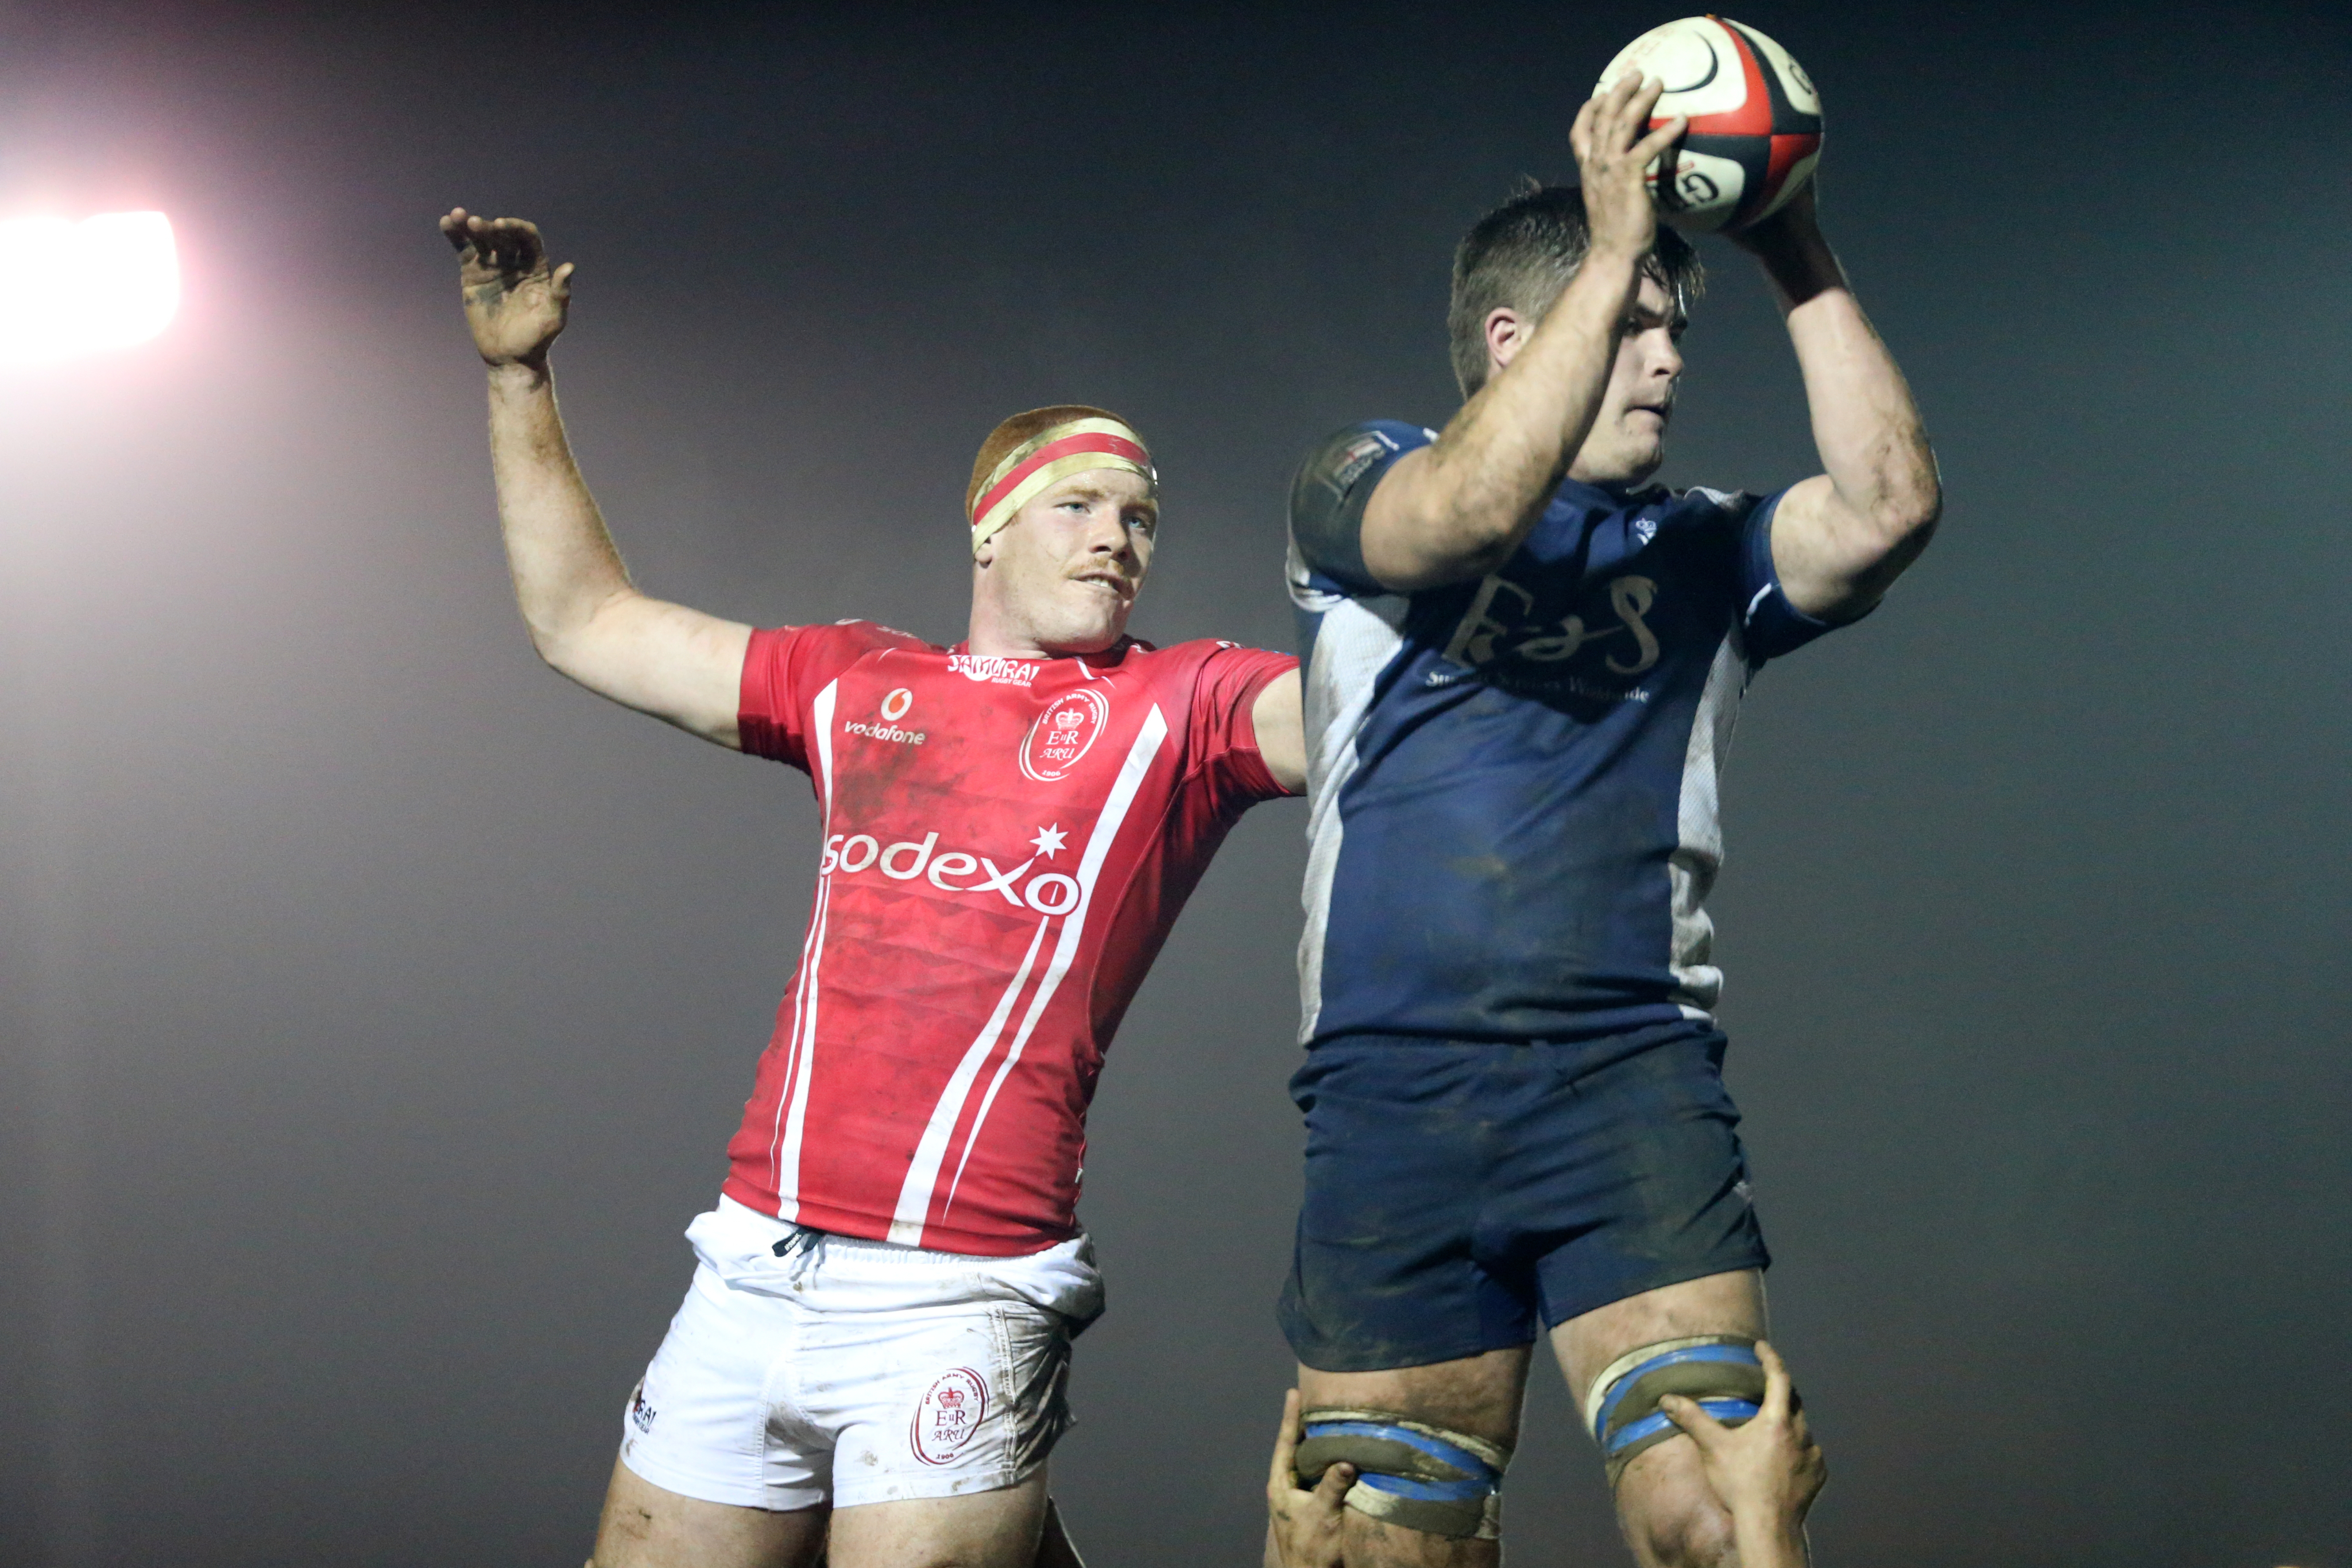 Jack Basher secures line out ball against the Army at Aldershot.  Click on image to go to the gallery.